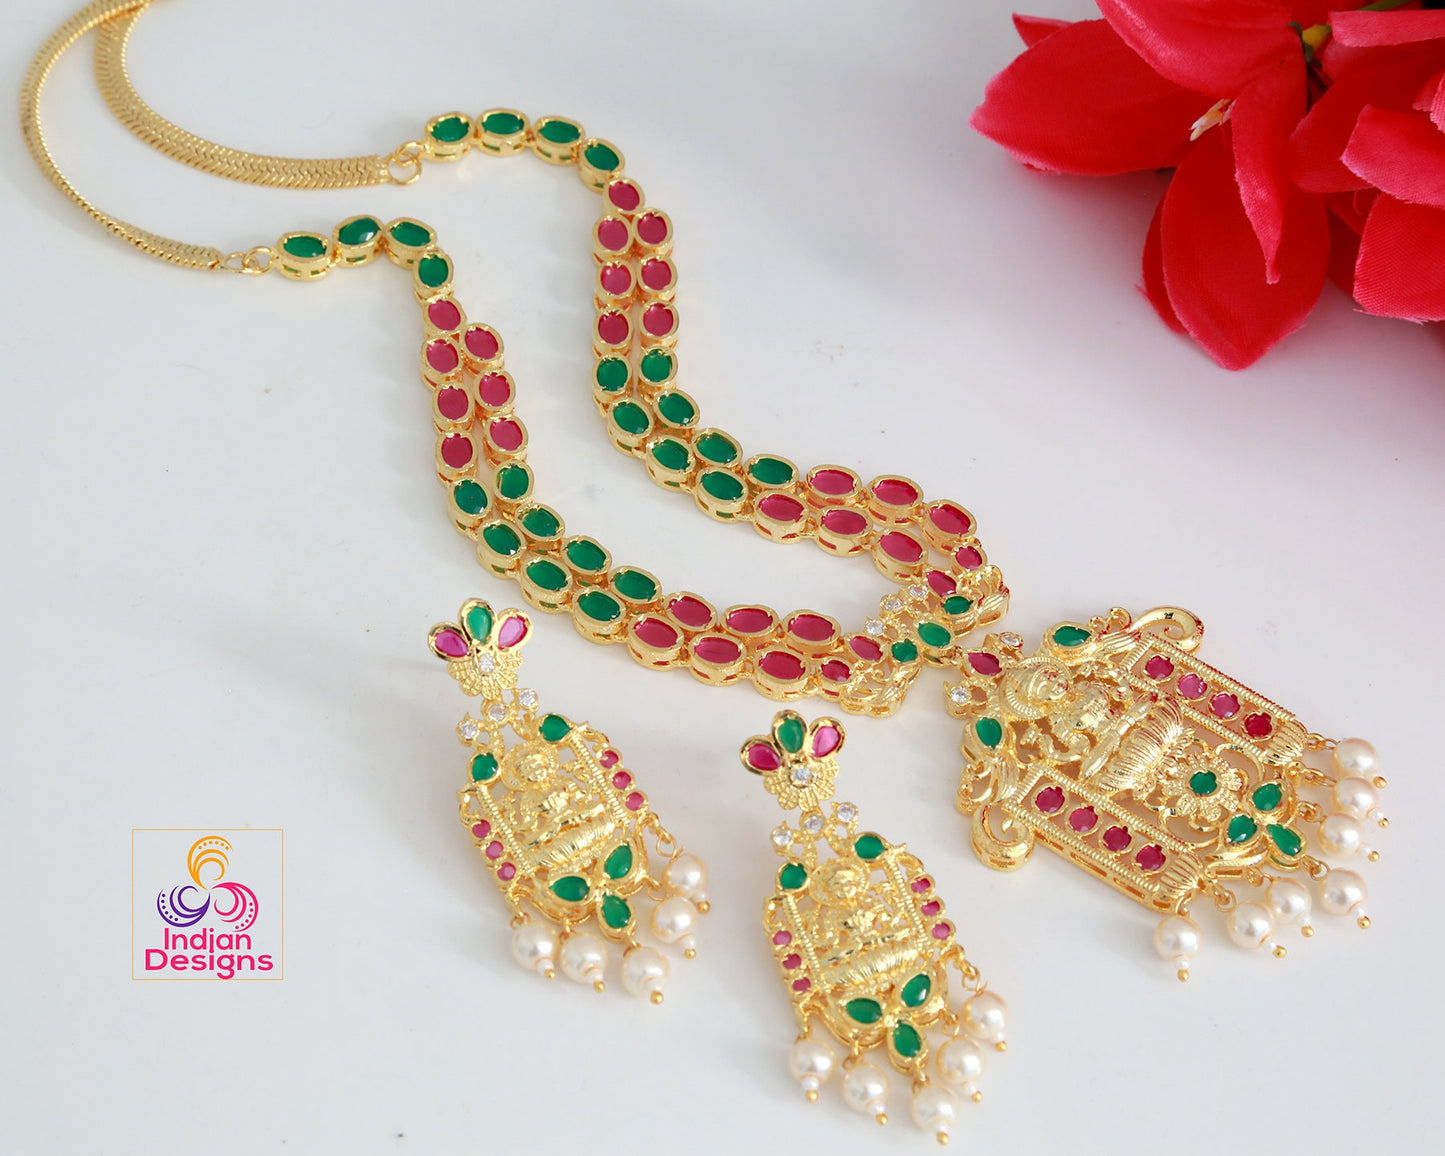 Lakshmi devi necklace designs | Gold necklace designs with ruby and emerald stones with Lakshmi Pendant |Indian Temple jewelry Necklace